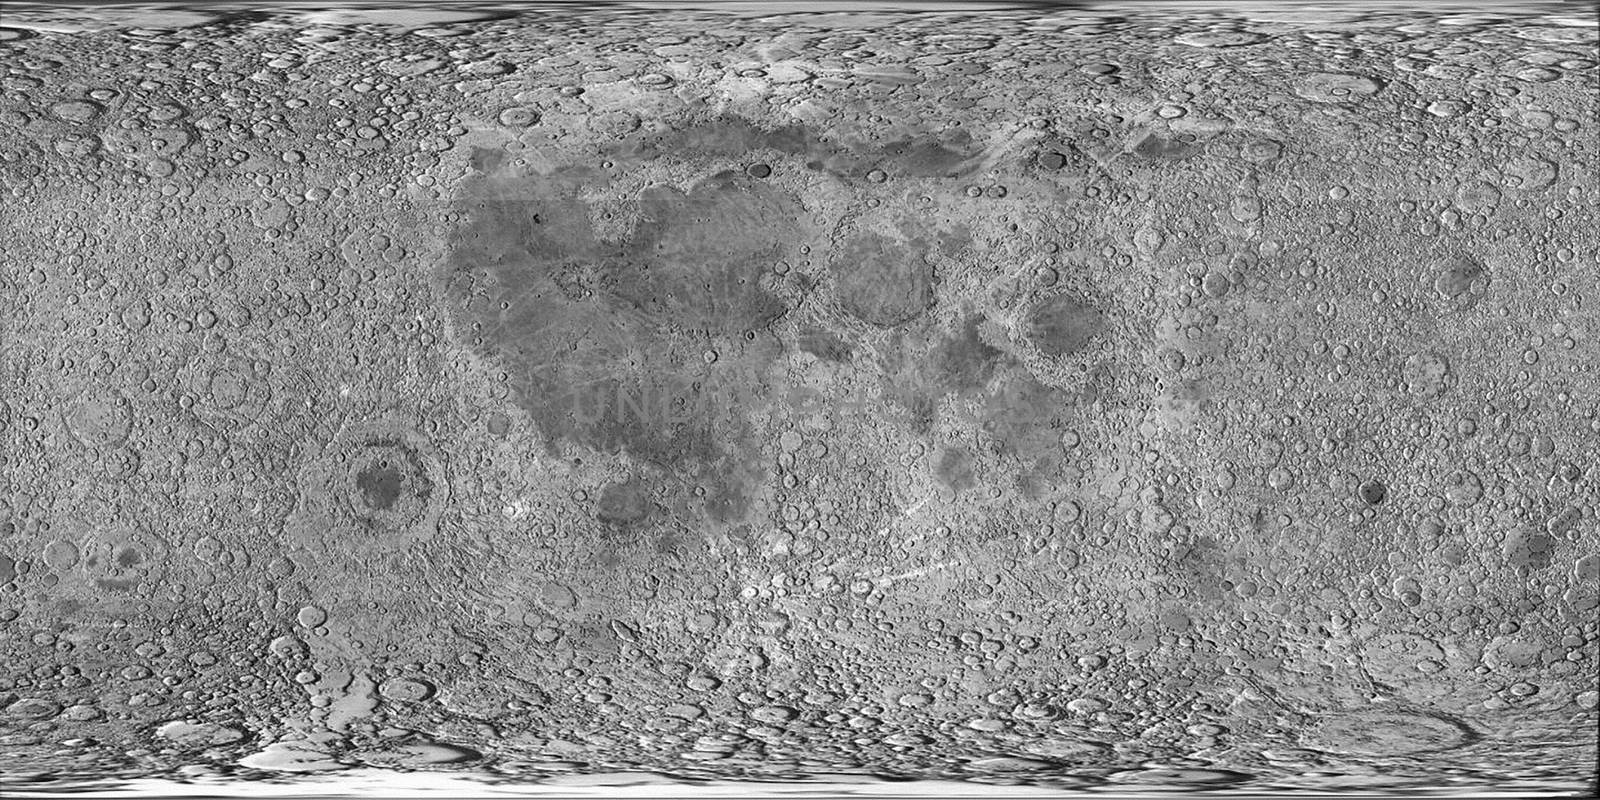 Moon surface by applesstock